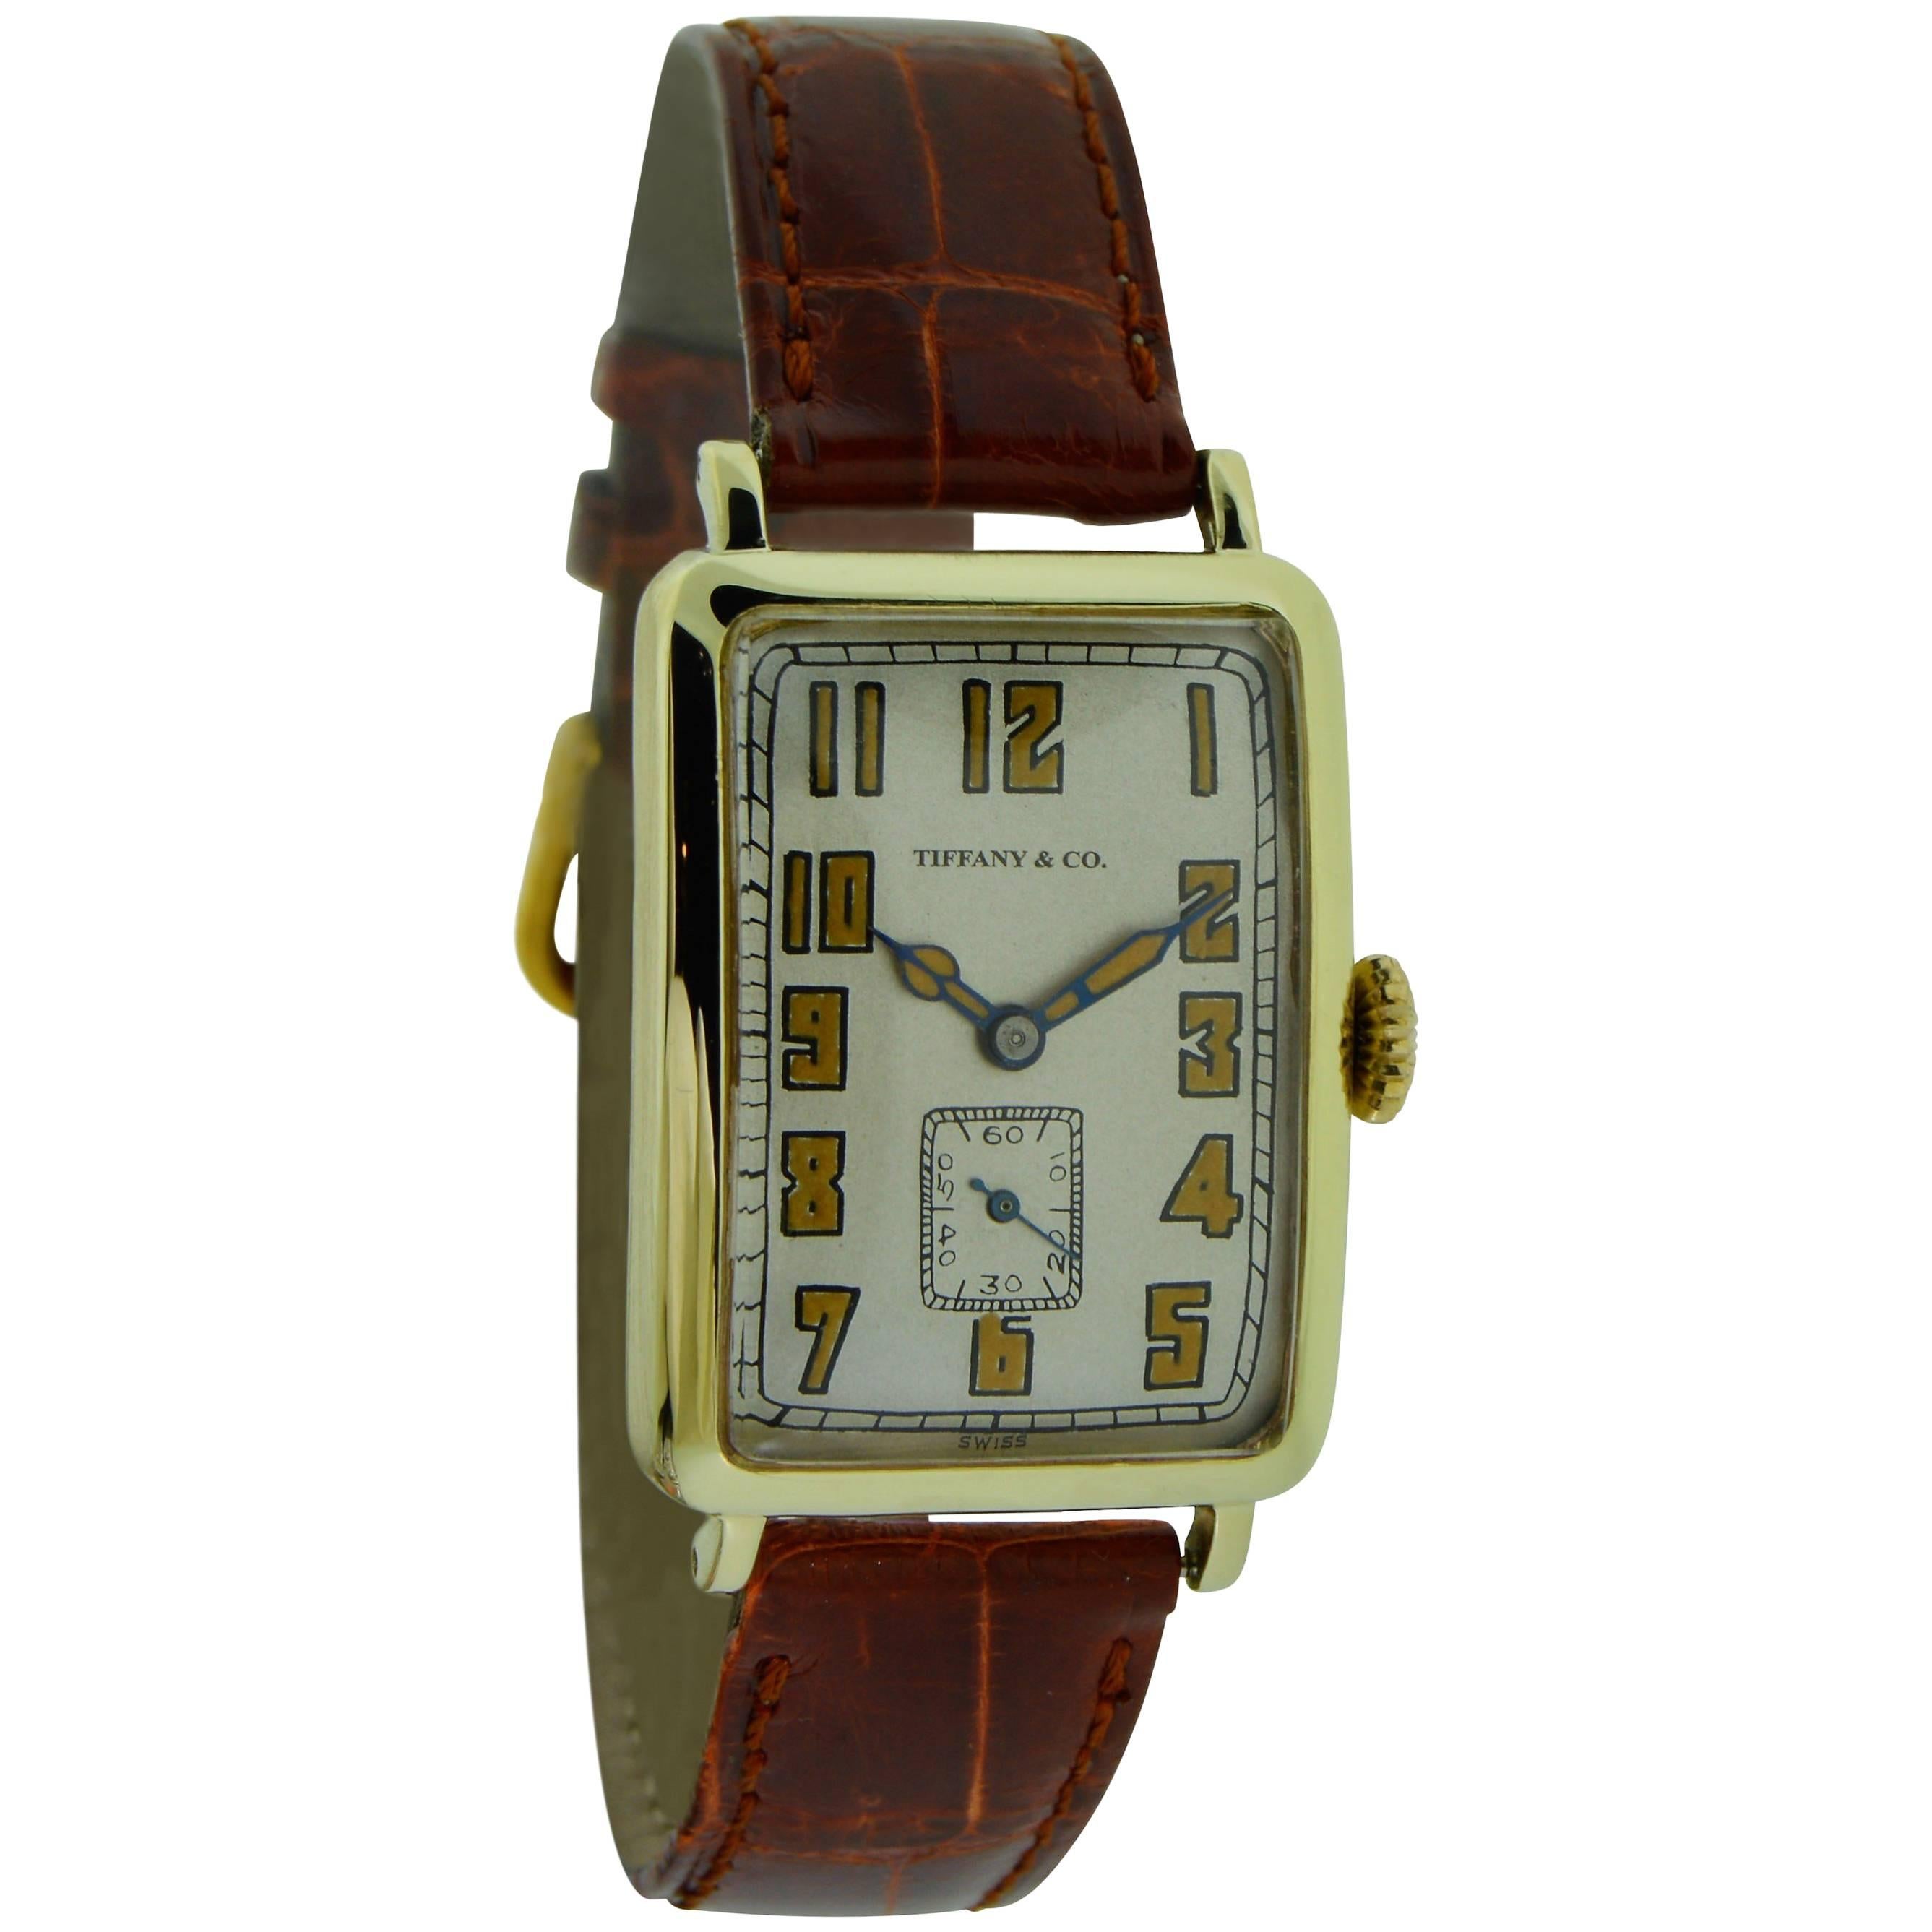 Tiffany & Co. Solid Gold Longines Dial Stern Freres Art Deco Manual Wristwatch